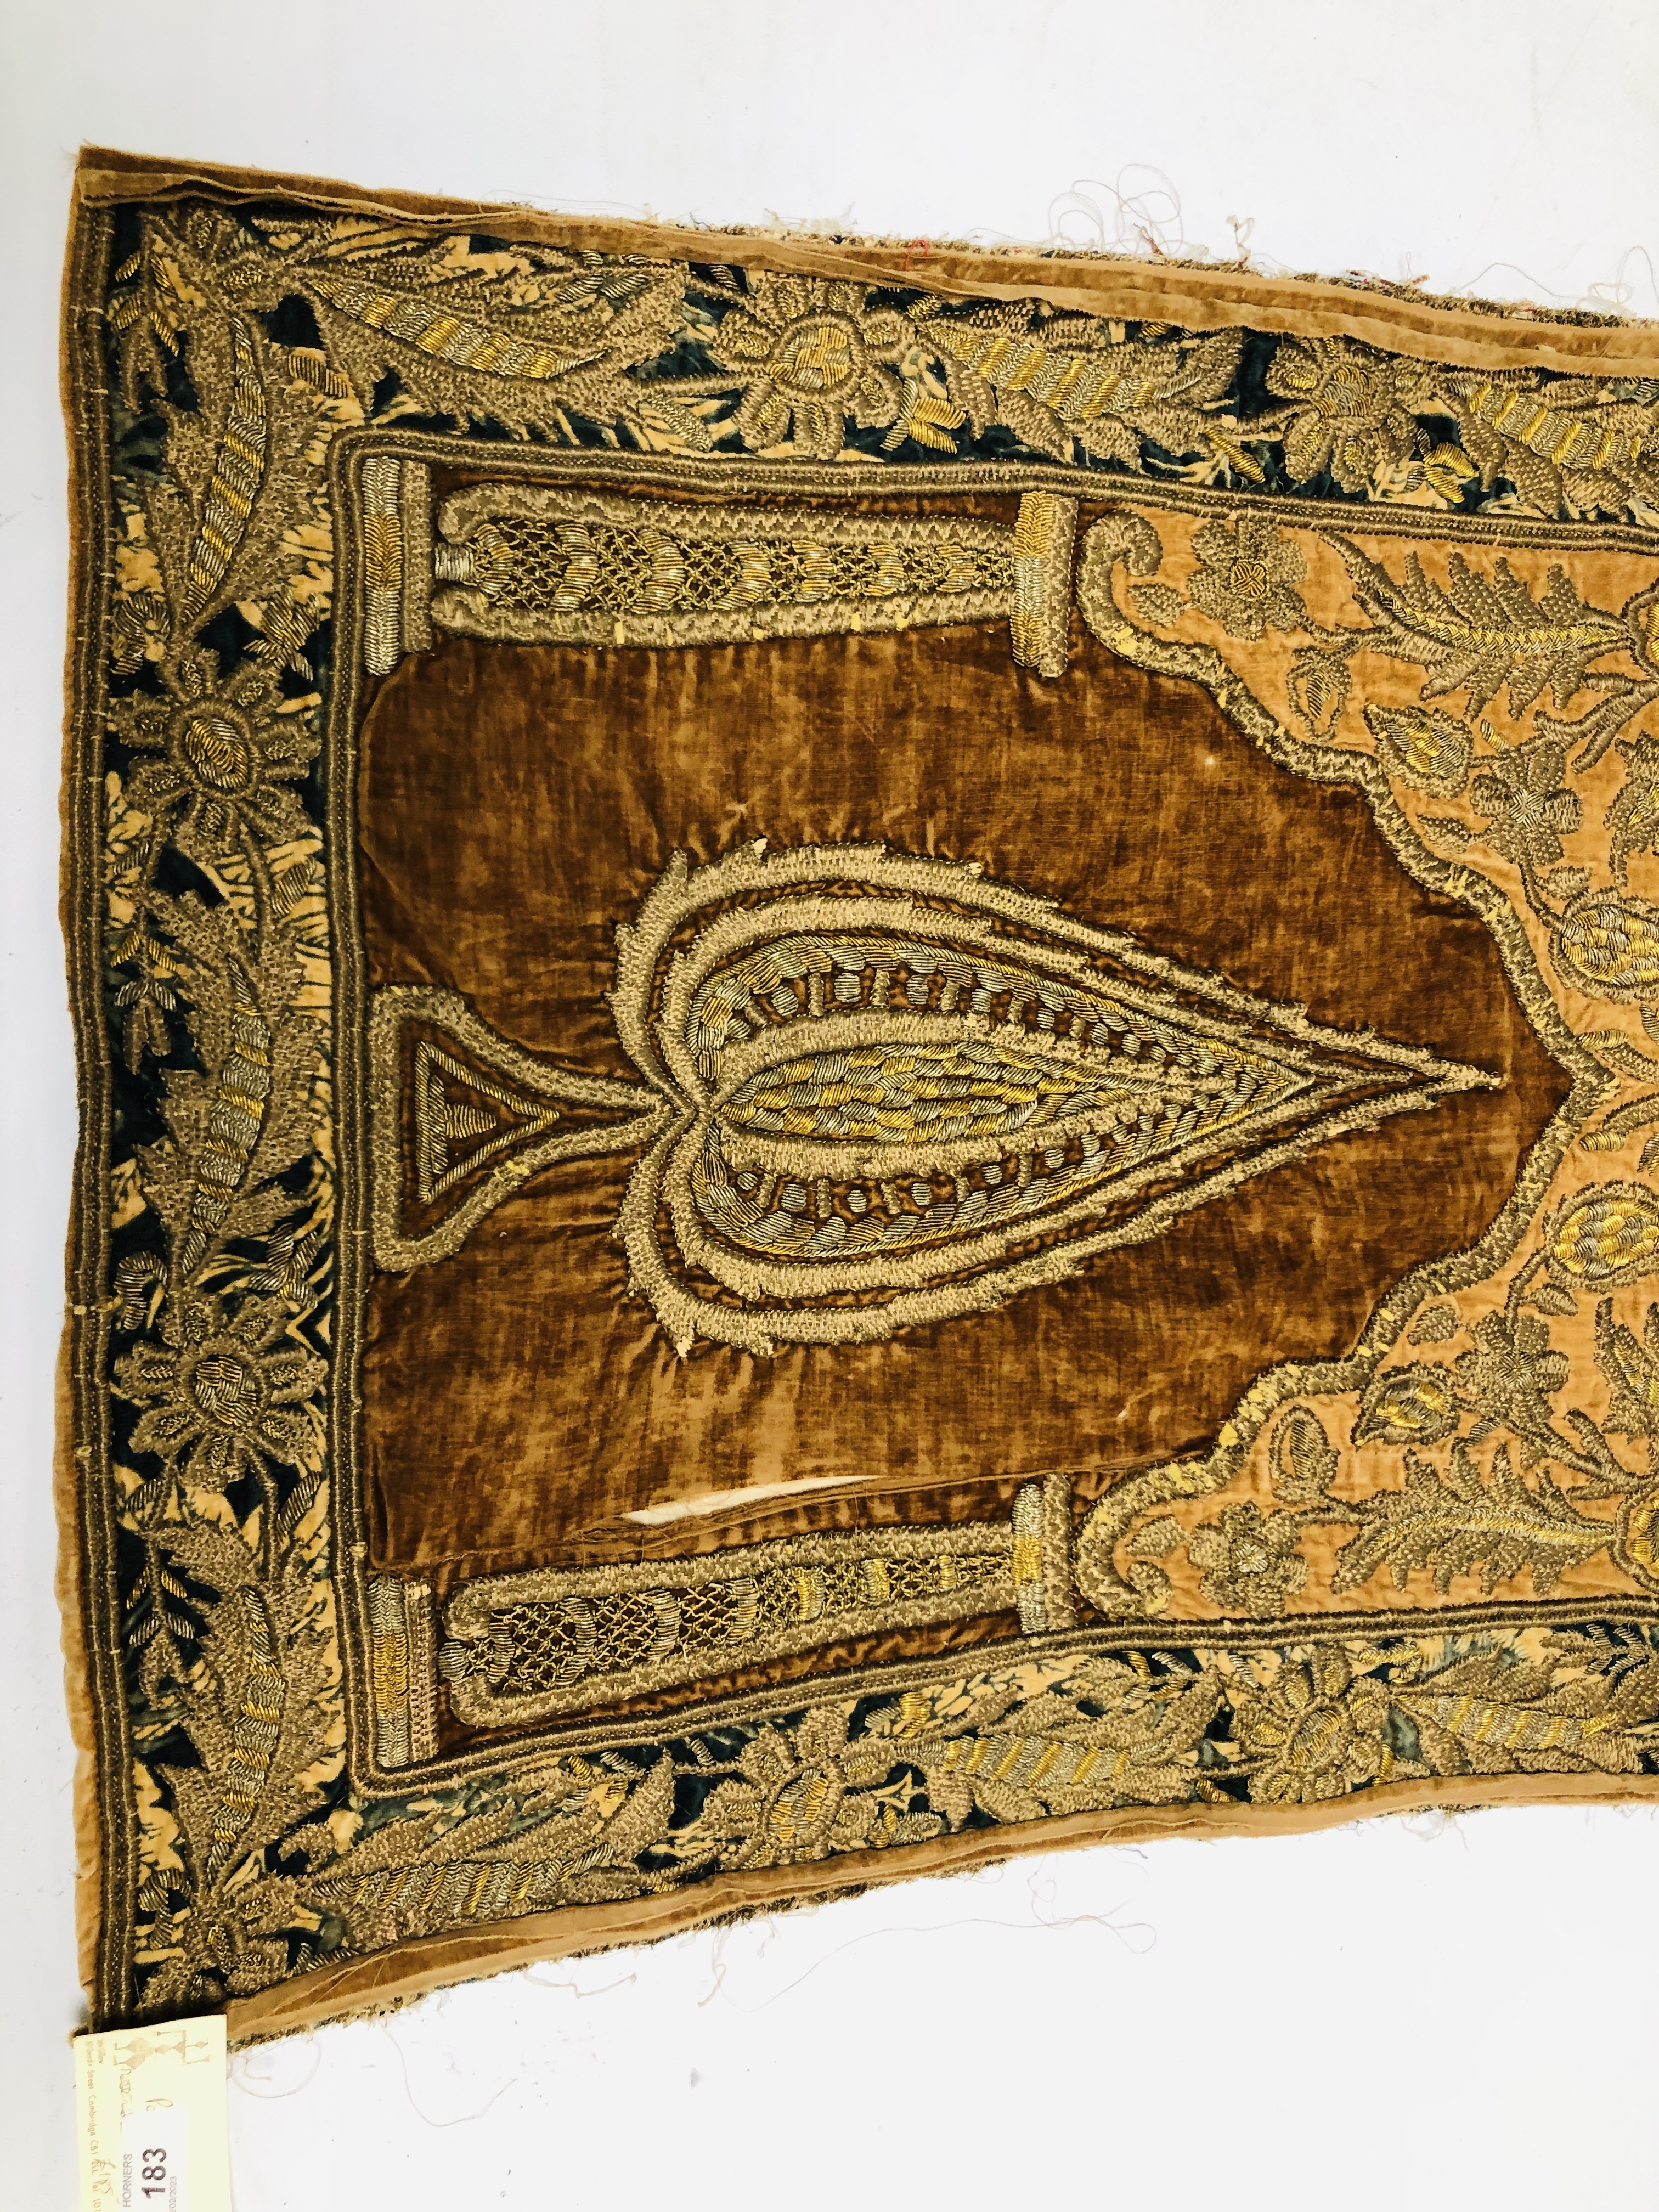 A PERSIAN RELIGIOUS METAL THREAD EMBROIDERY PANEL WITH CENTRAL PALMATE DESIGN, 83 X 58CM. - Image 2 of 8